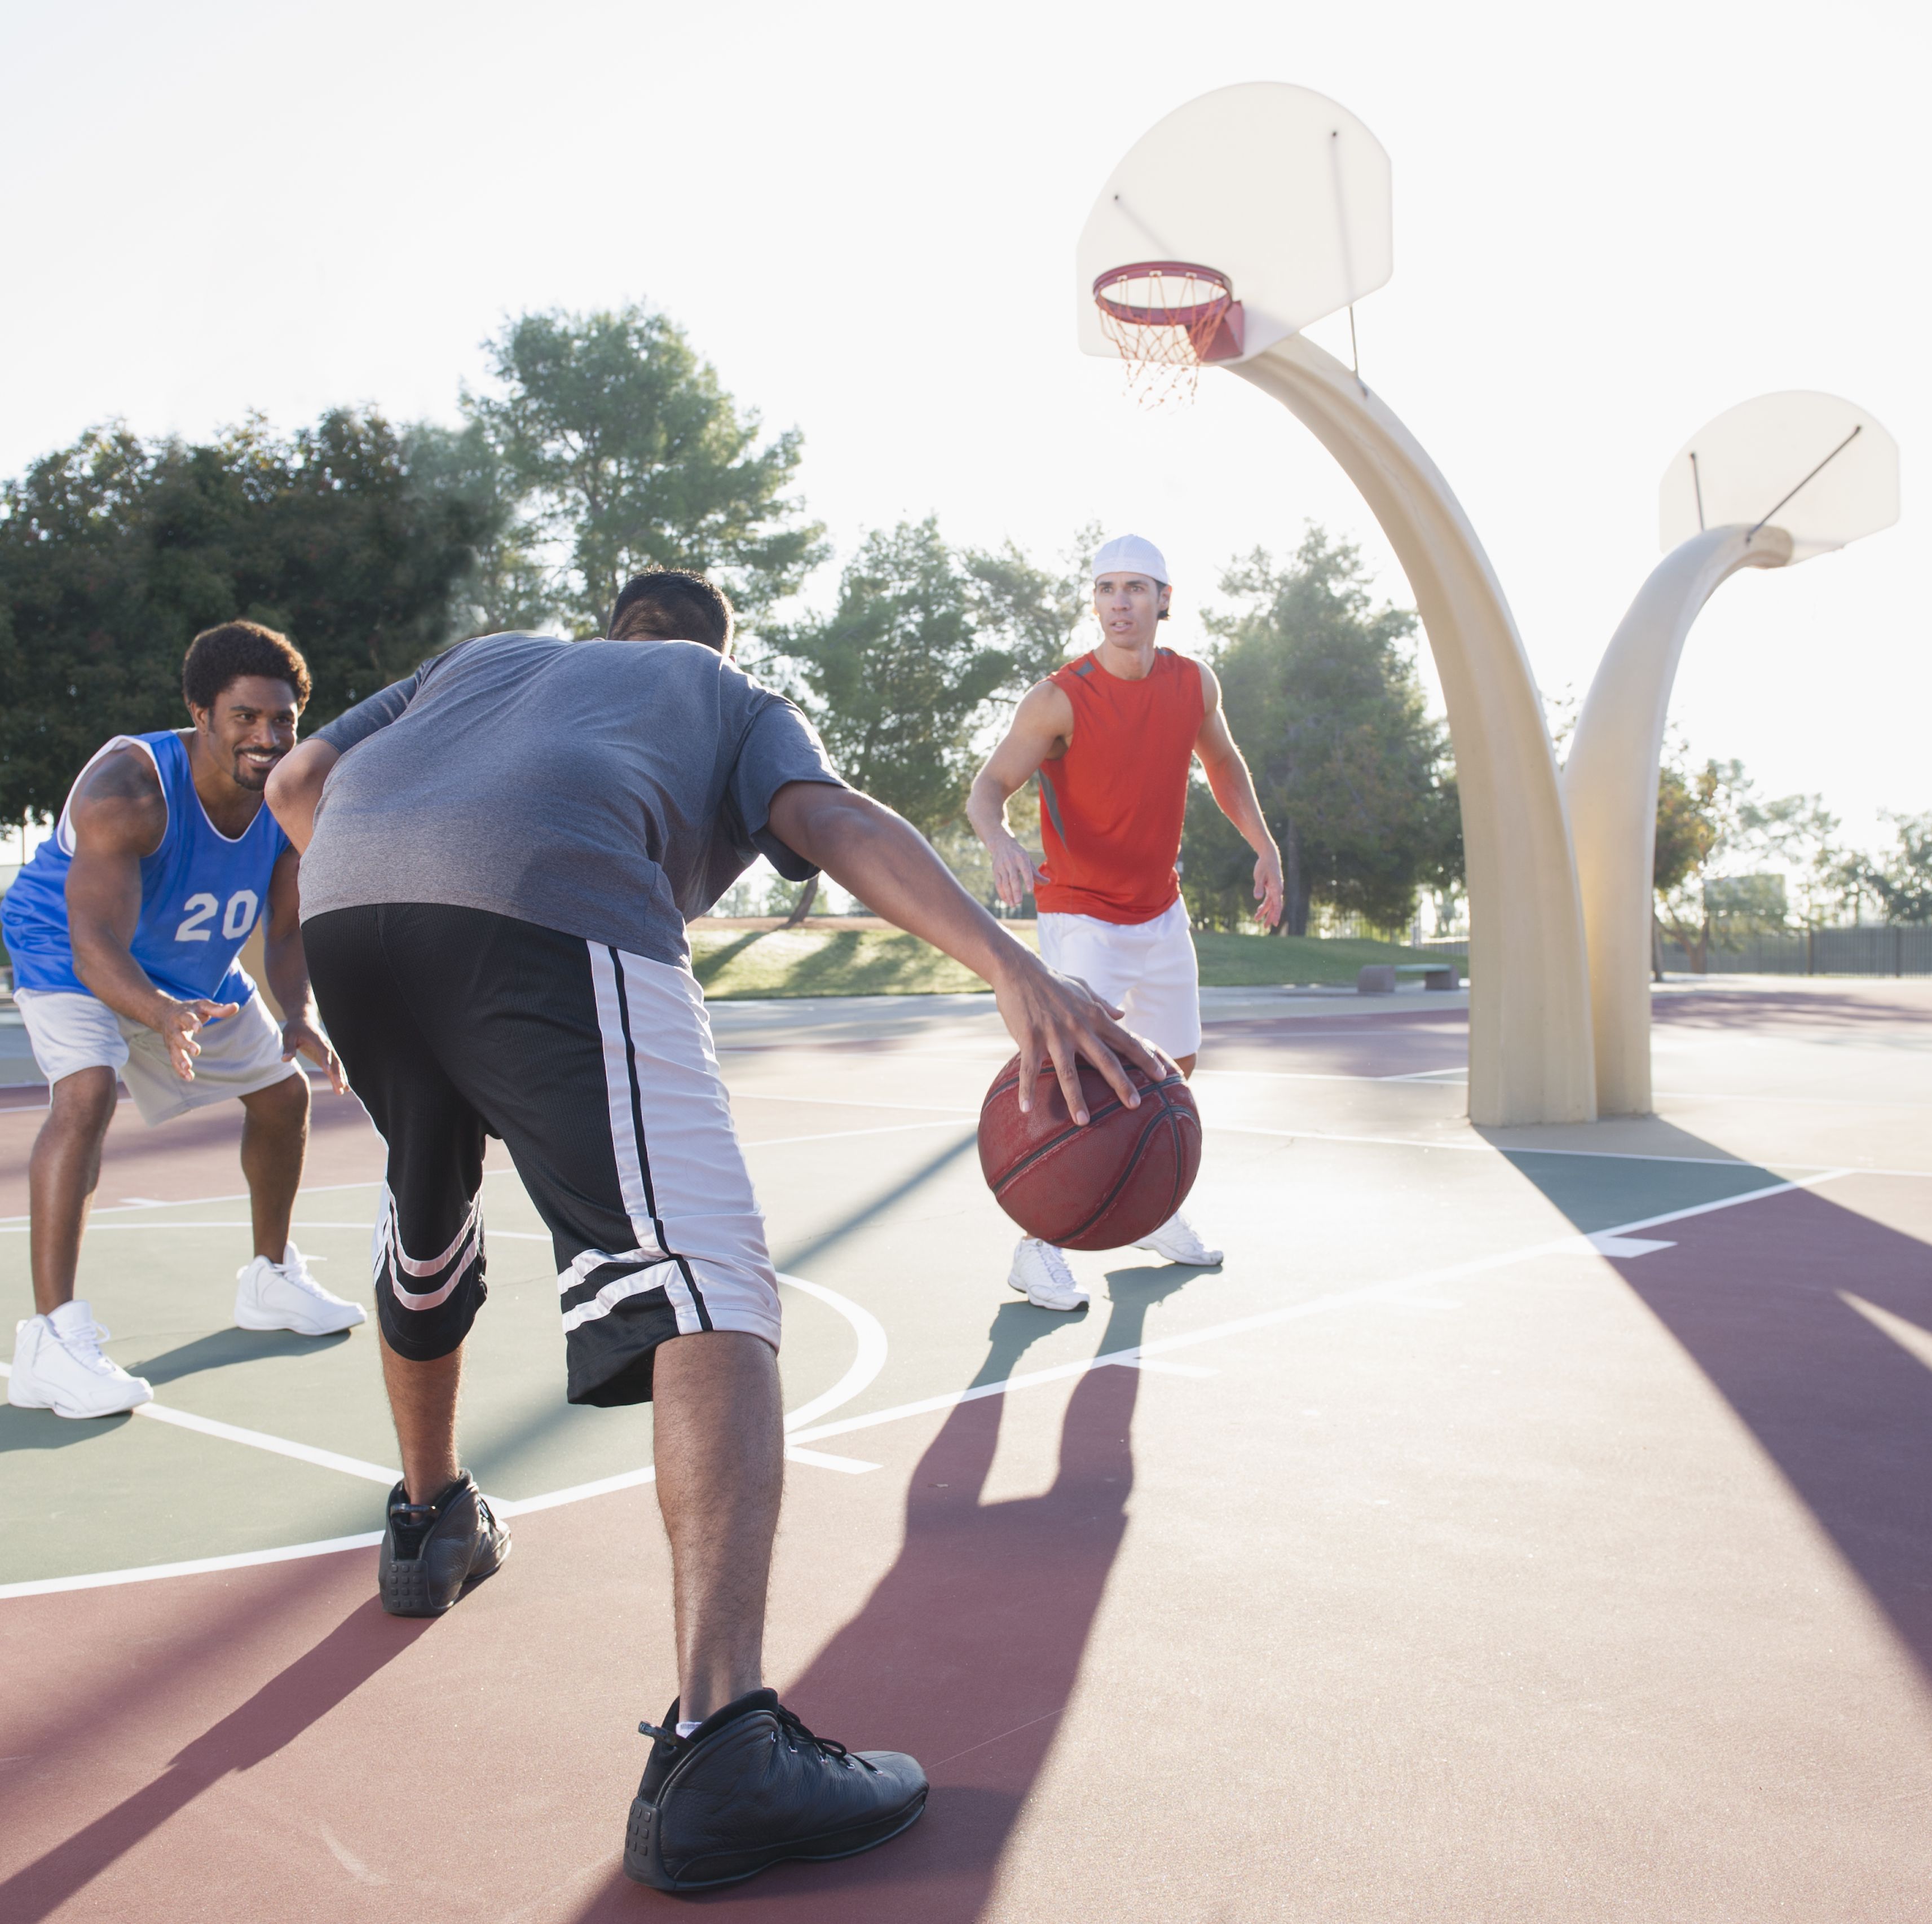 Try This Warmup Before Your Next Pickup Basketball Game